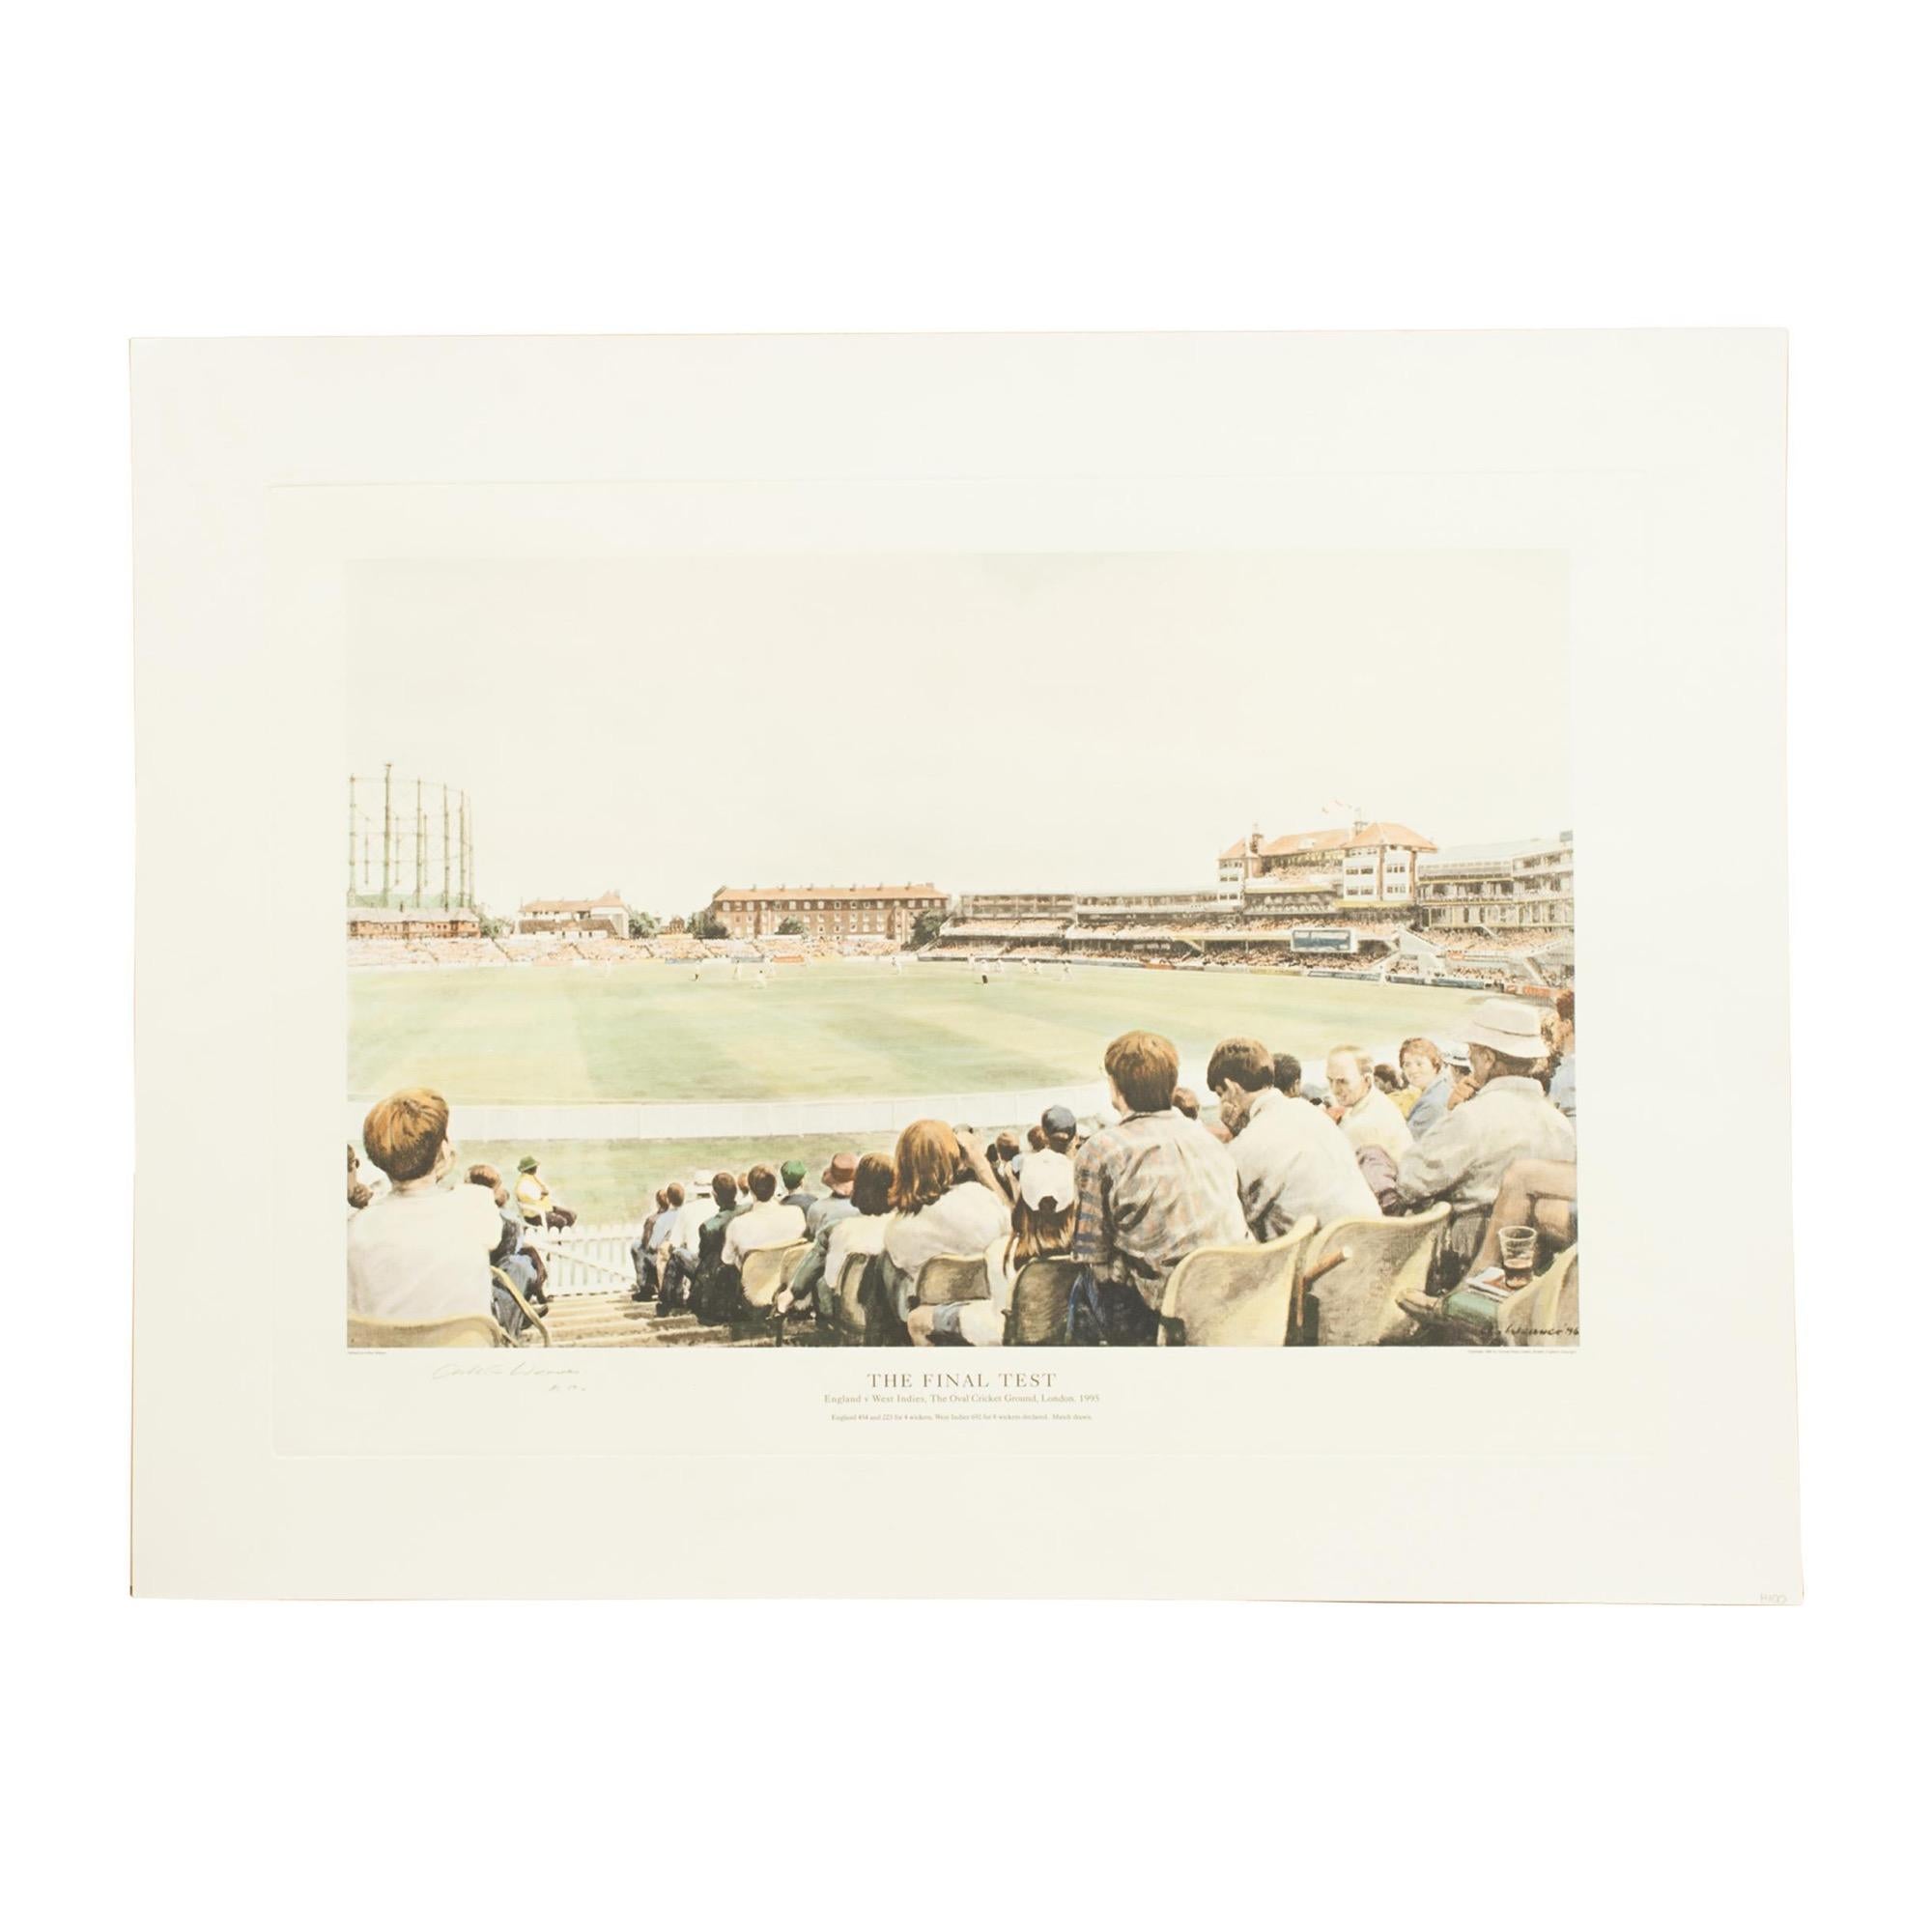 1990's Arthur Weaver Oval Cricket Ground Print, England v West Indies.
A colourful cricket lithograph signed by the artist, Arthur Weaver, of the 'Final Test' at The Oval Cricket Ground.
The Final Test, England v West Indies, The Oval Cricket